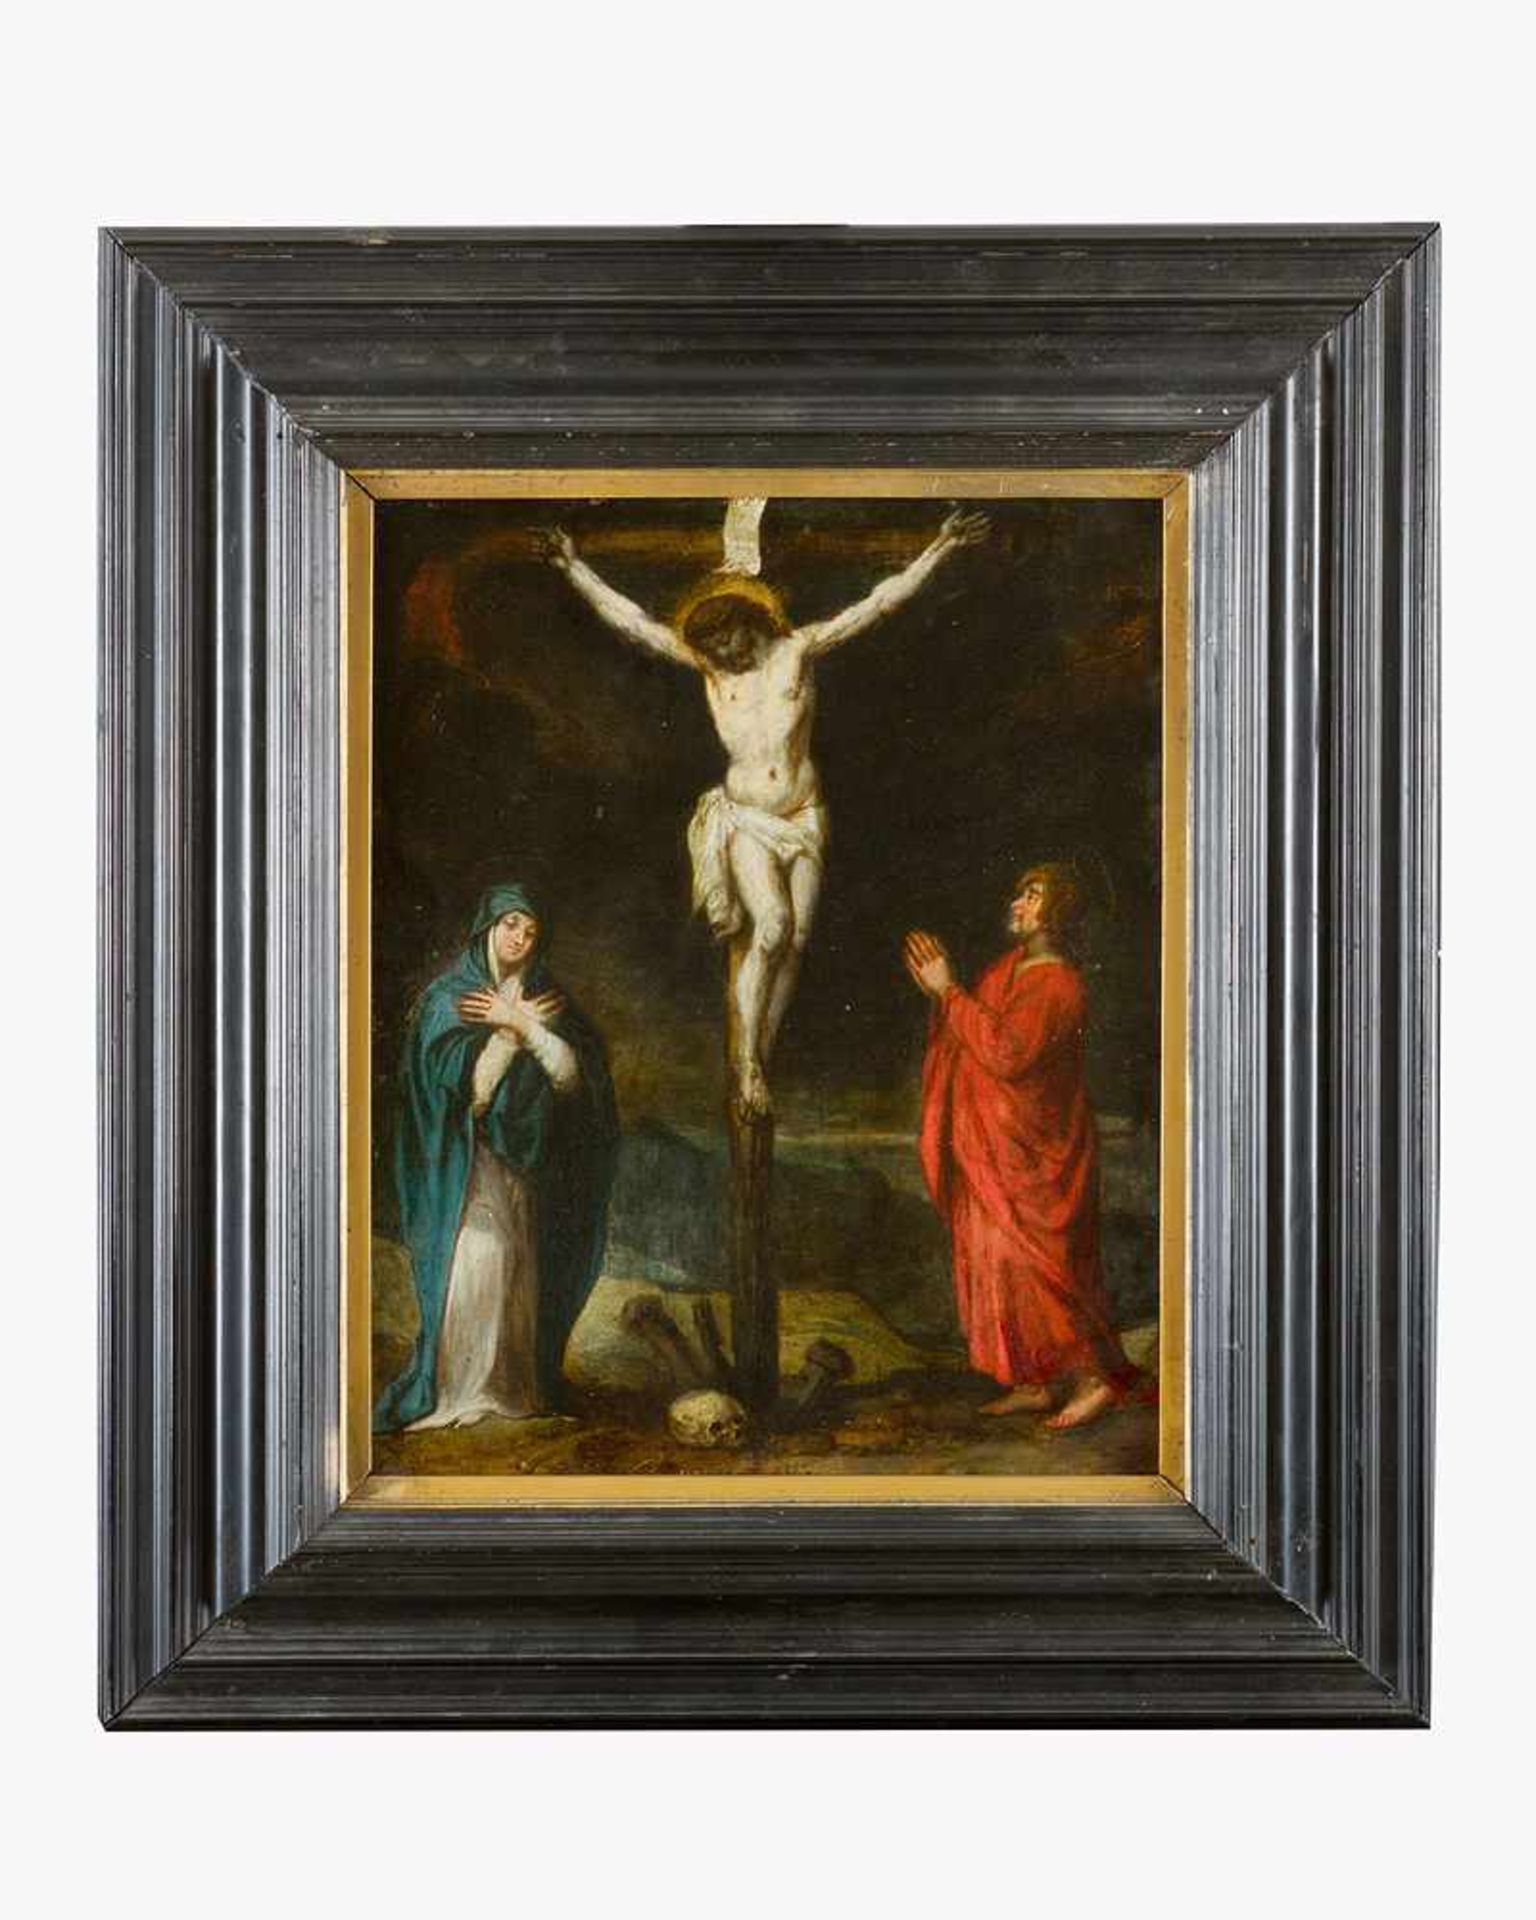 Flemish school around 1600, The Crucifixion; oil on copper, framed.35x27cm- - -24.00 % buyer's